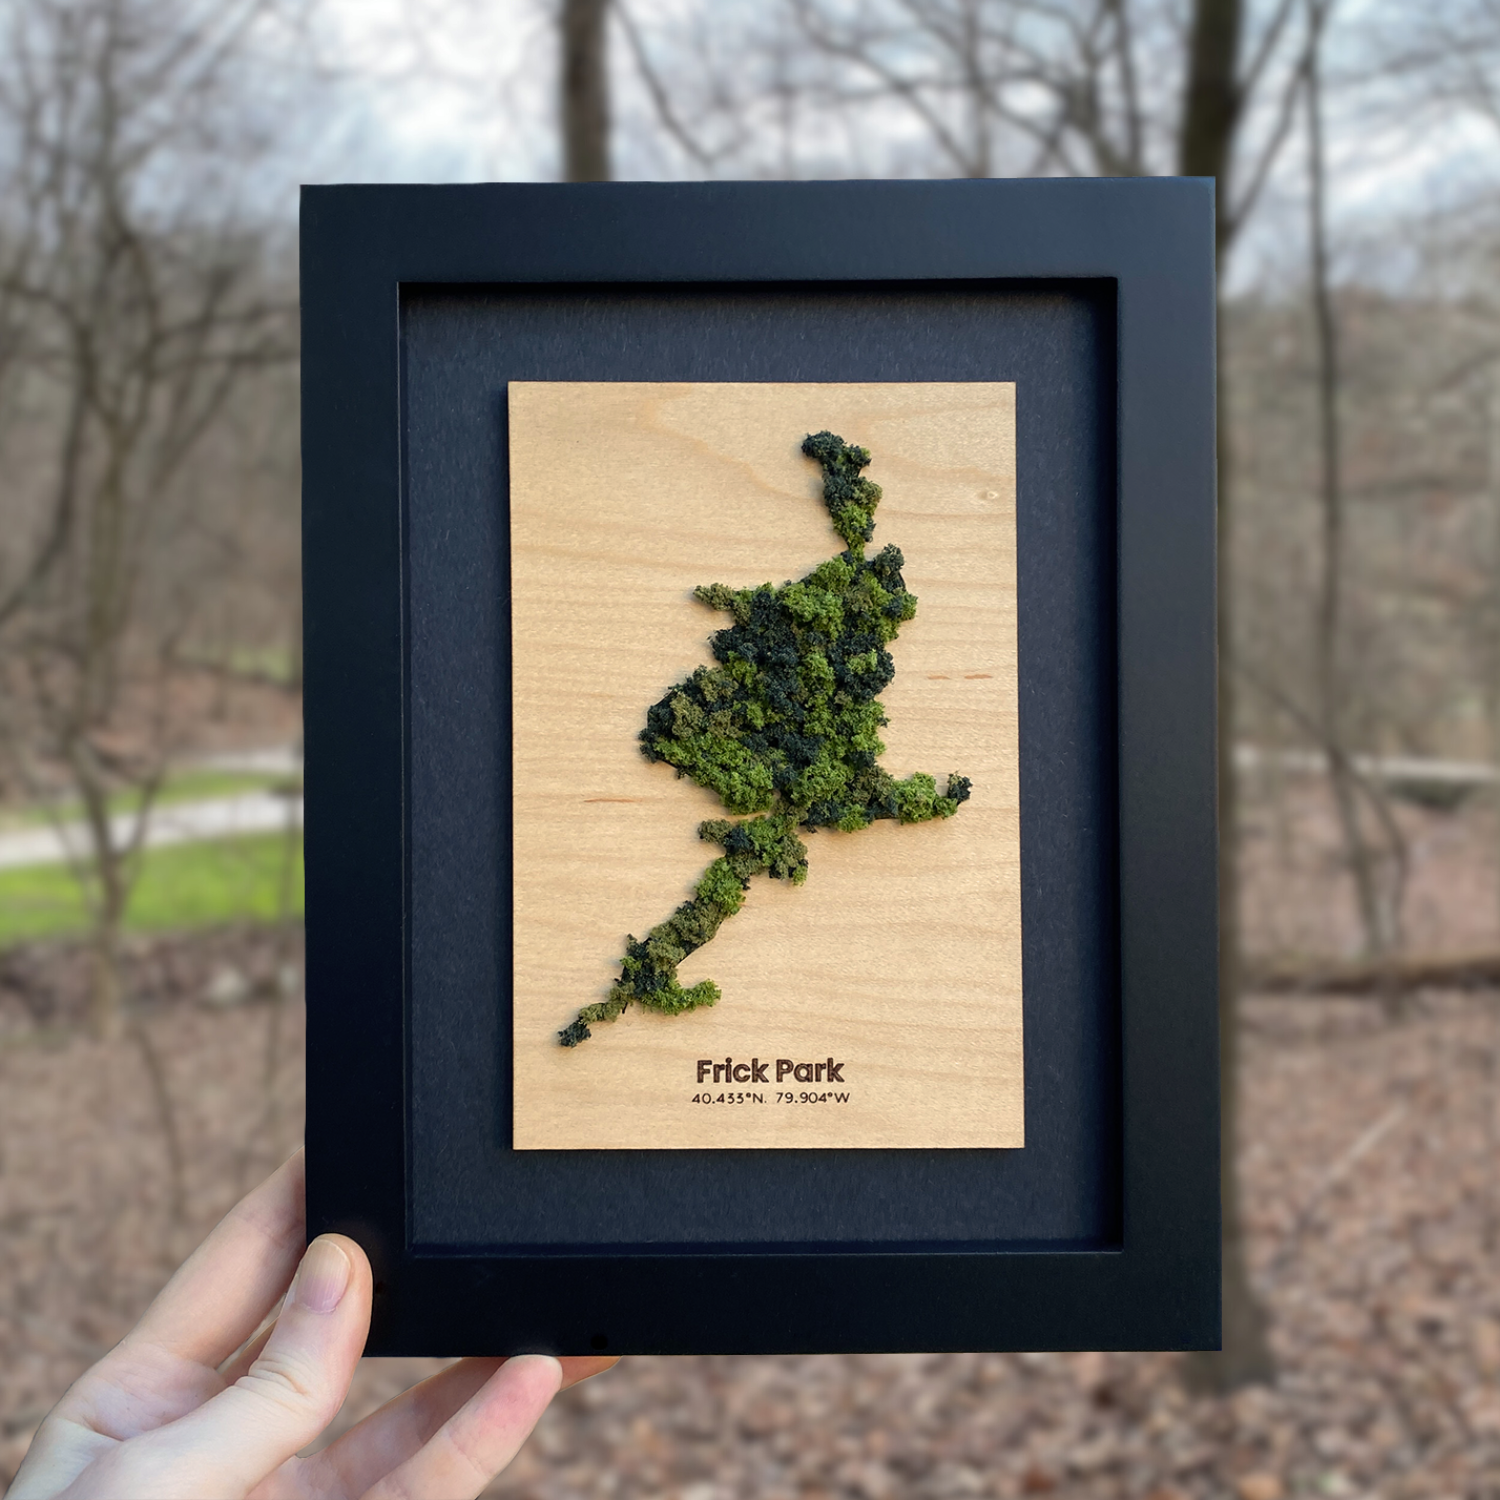 Handcrafted wood map of Frick Park made locally in Pittsburgh by LGBTQ woman owned small business. Local art that makes a perfect gift for office decor.